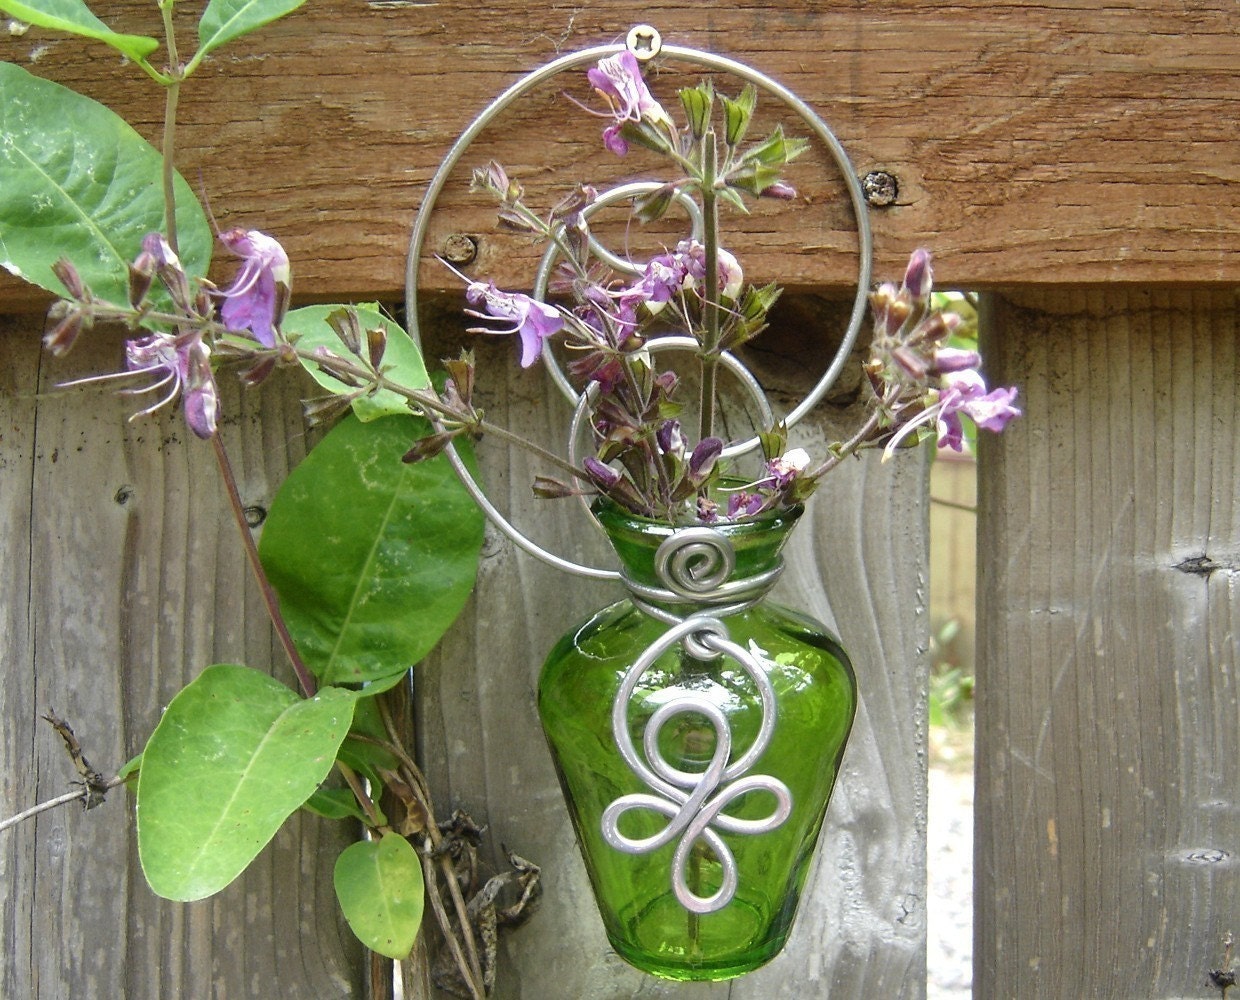 Hanging Vase Little Green Celtic Spirals - for flowers or making rootings or just looking pretty - Irish - St. Patrick's Day - nicholasandfelice